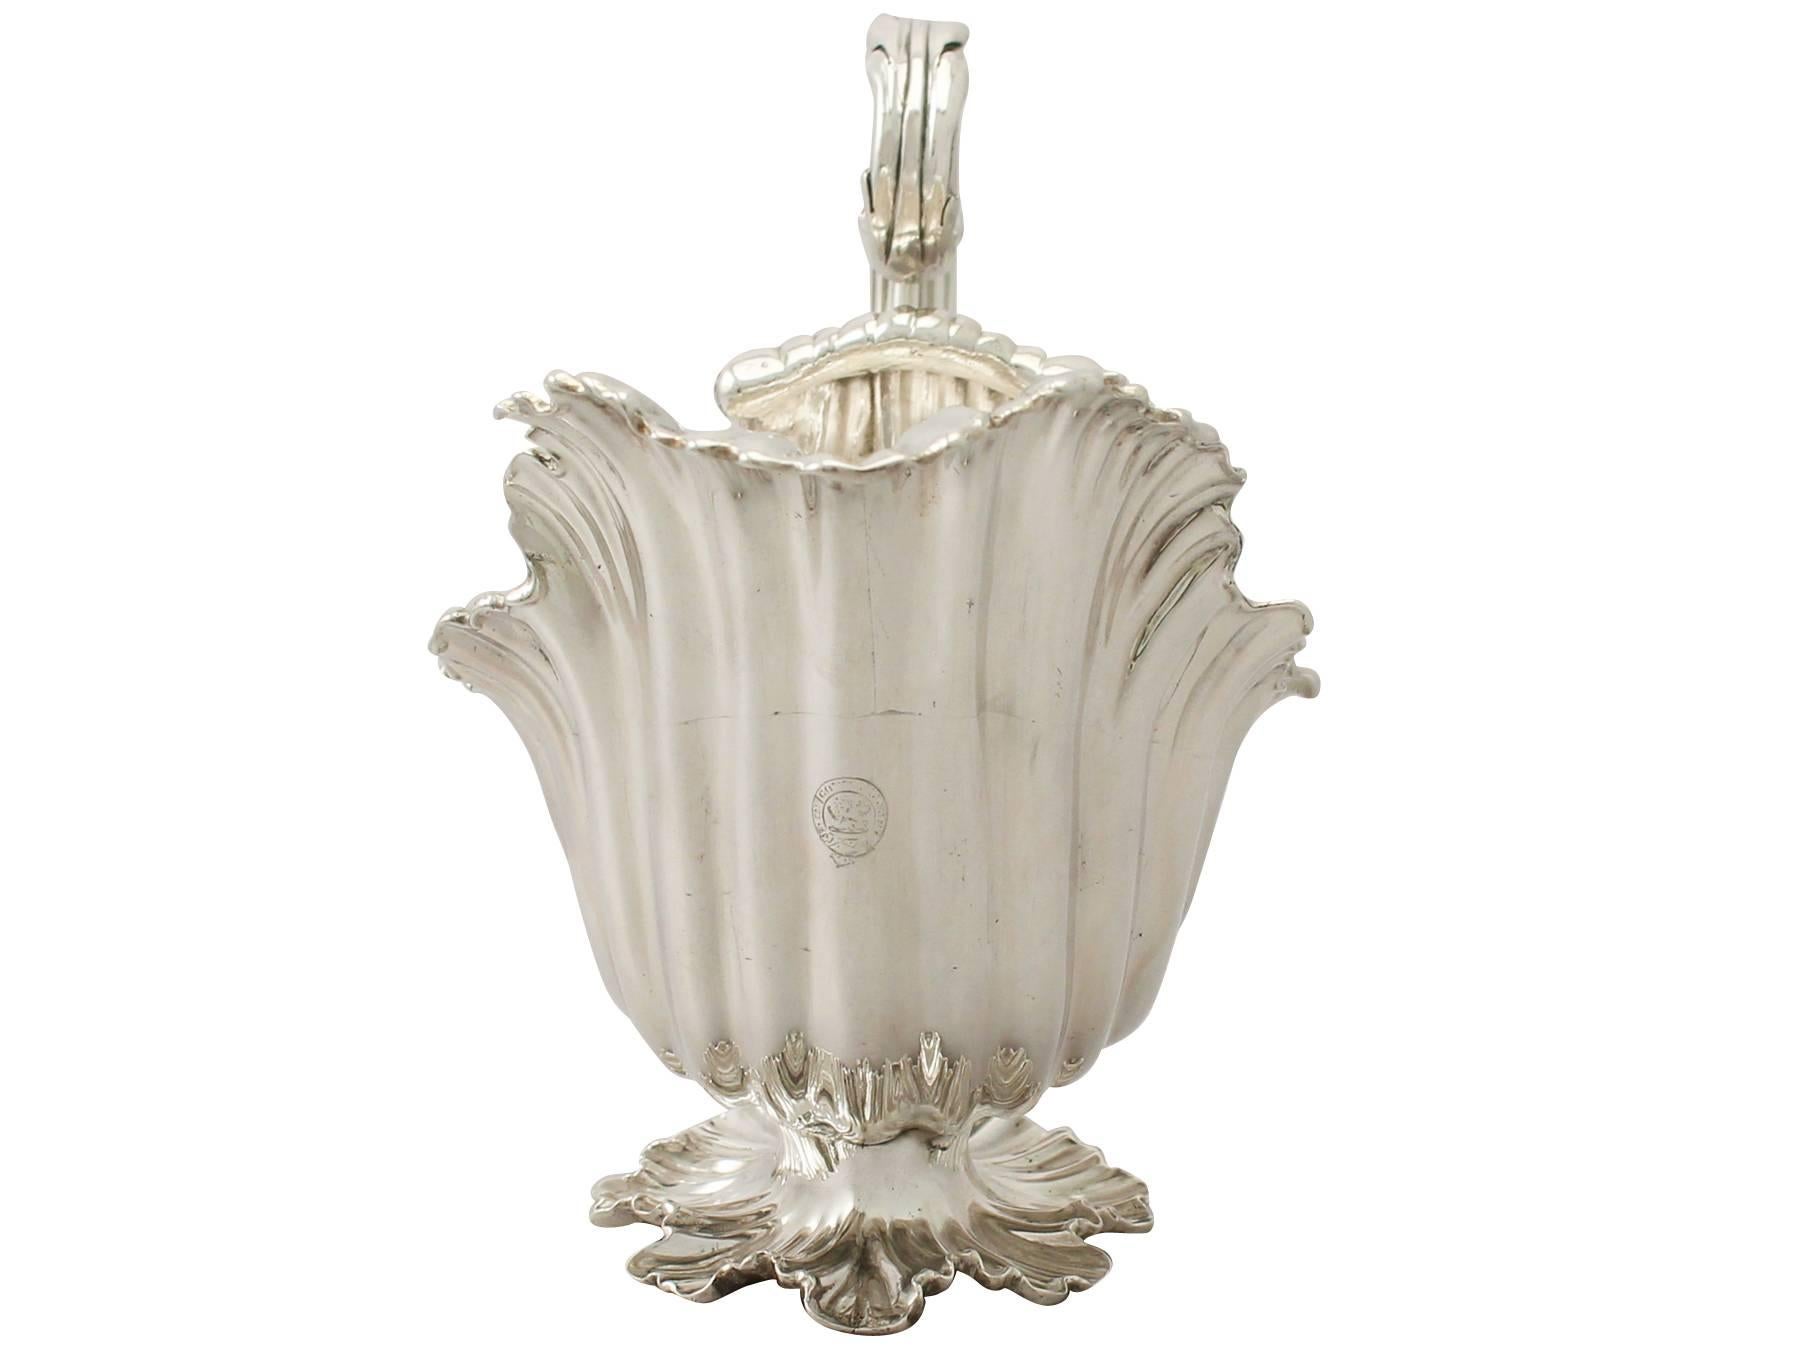 An exceptional, Fine and impressive, large antique William IV English sterling silver sauceboat/ gravy boat; an addition to our silver dining collection.

This exceptional antique William IV sterling silver sauceboat has an oval shaped form,